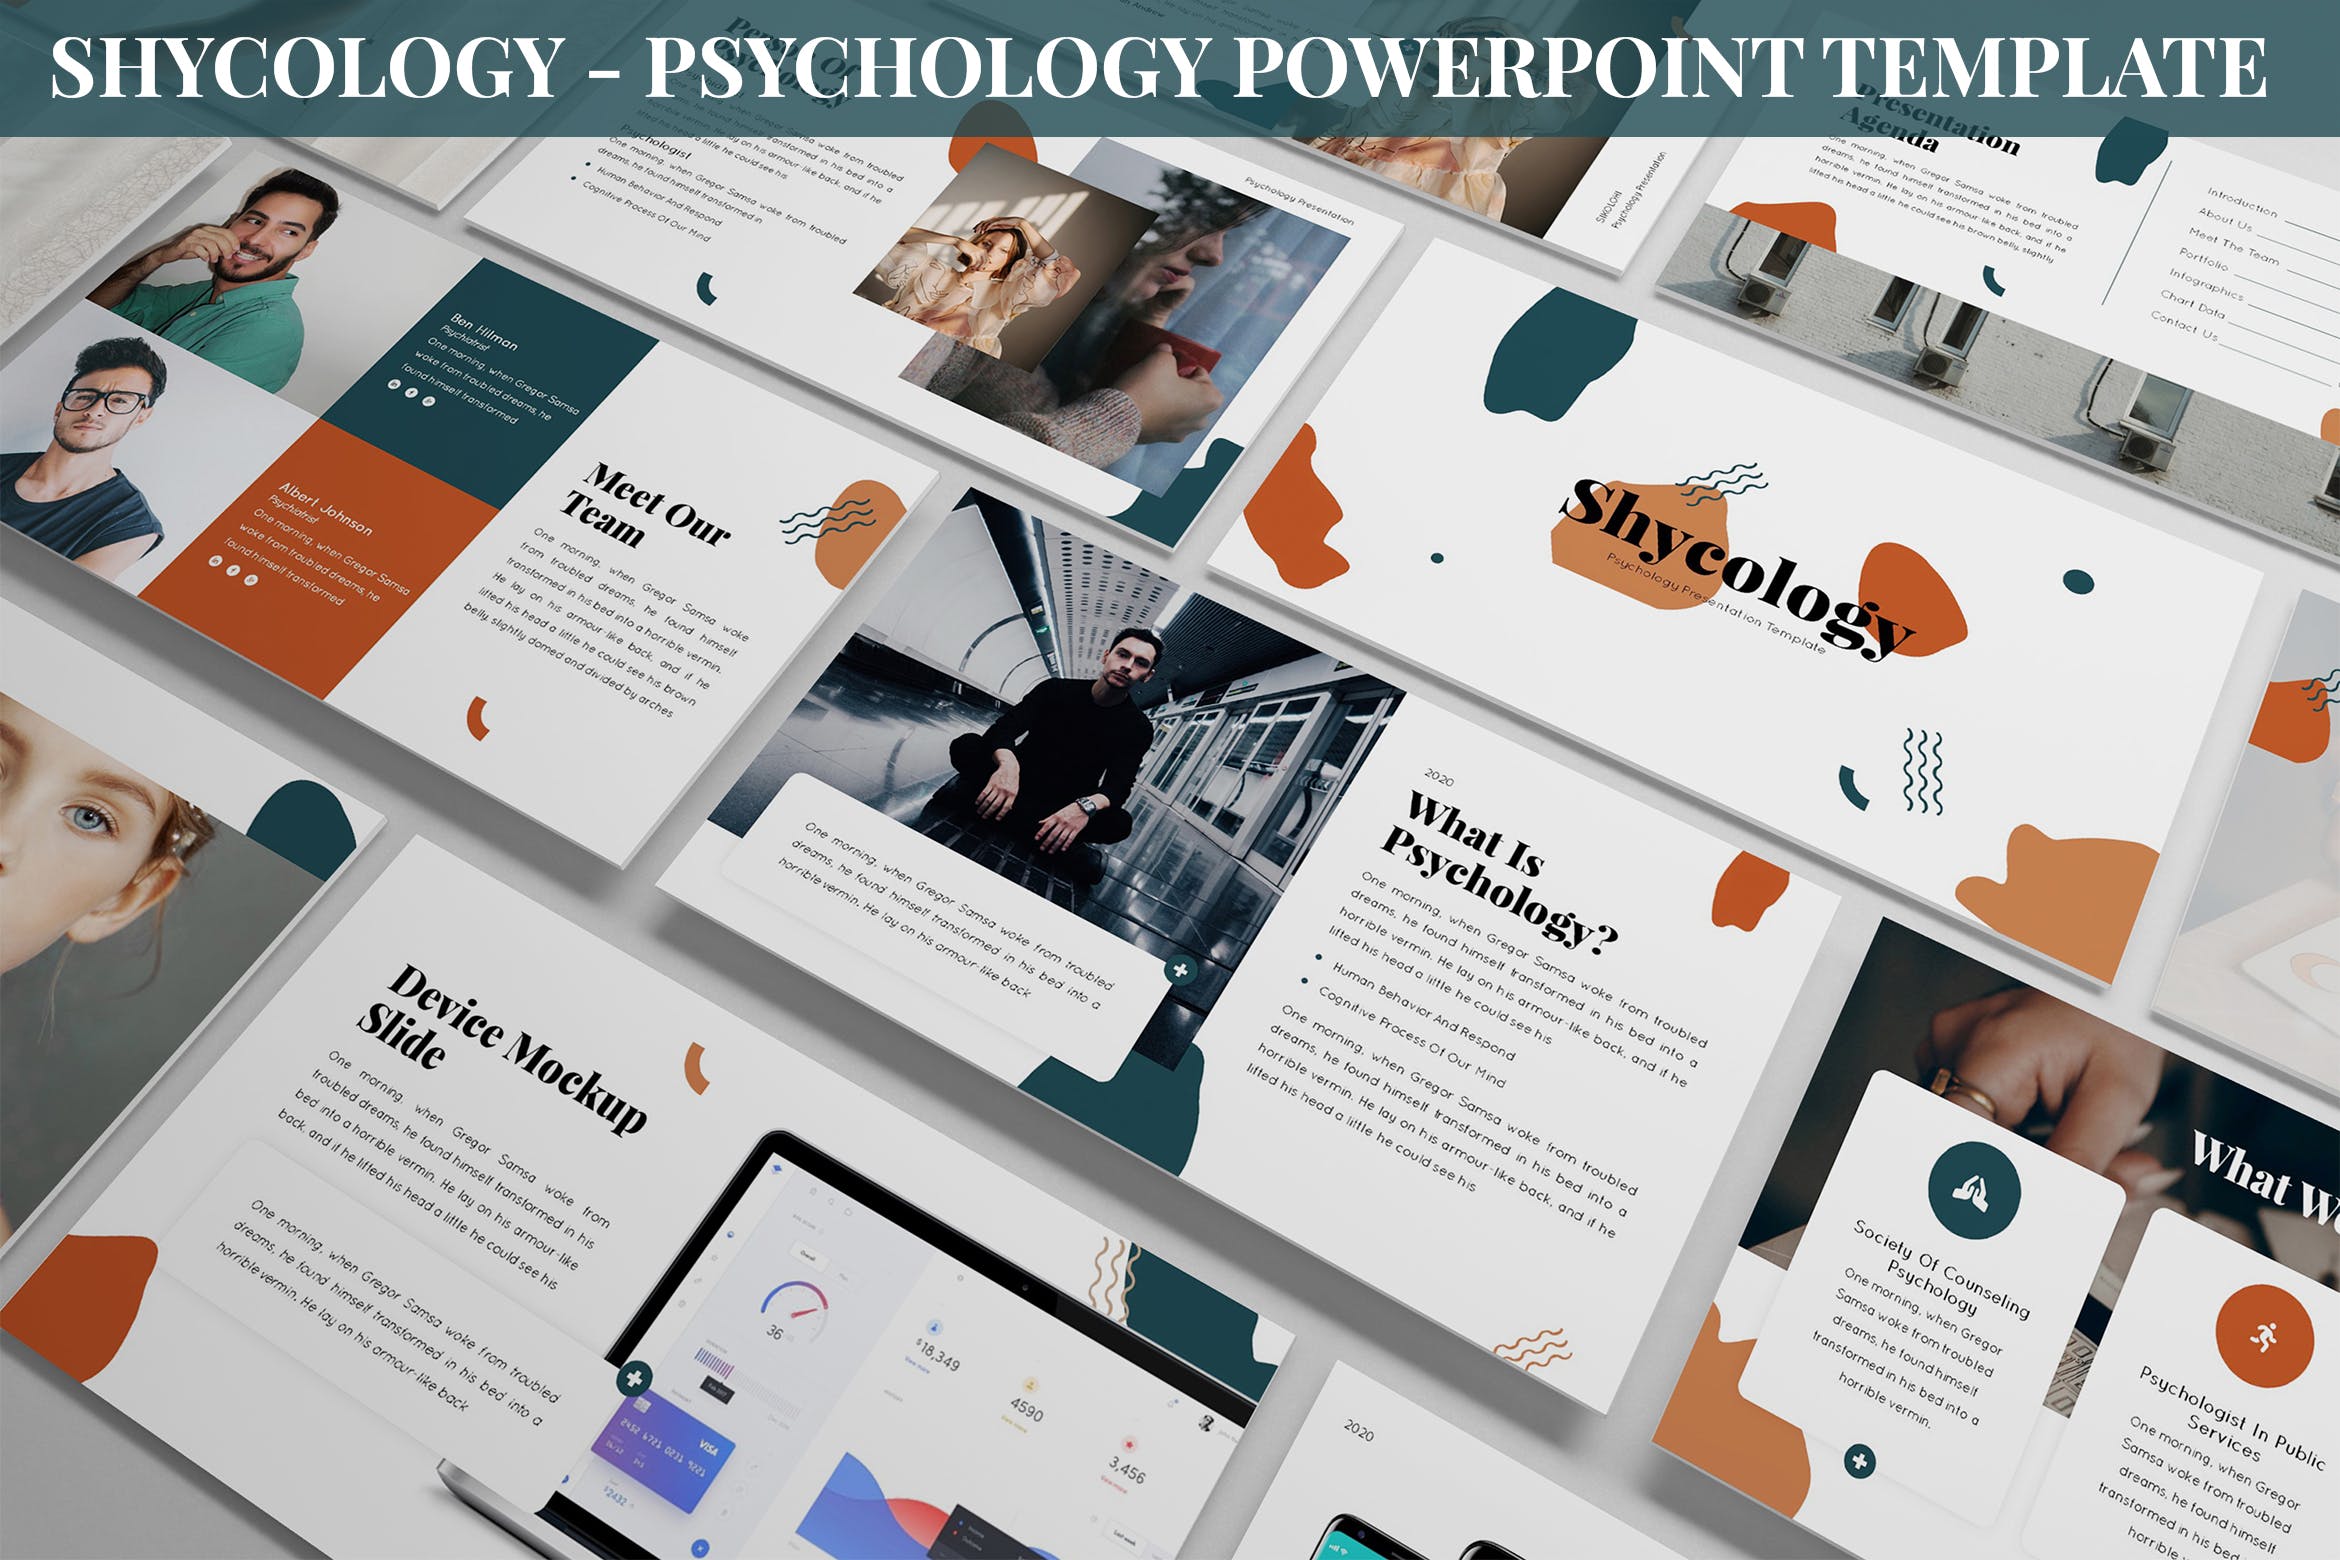 Shycology - Psychology Powerpoint Template